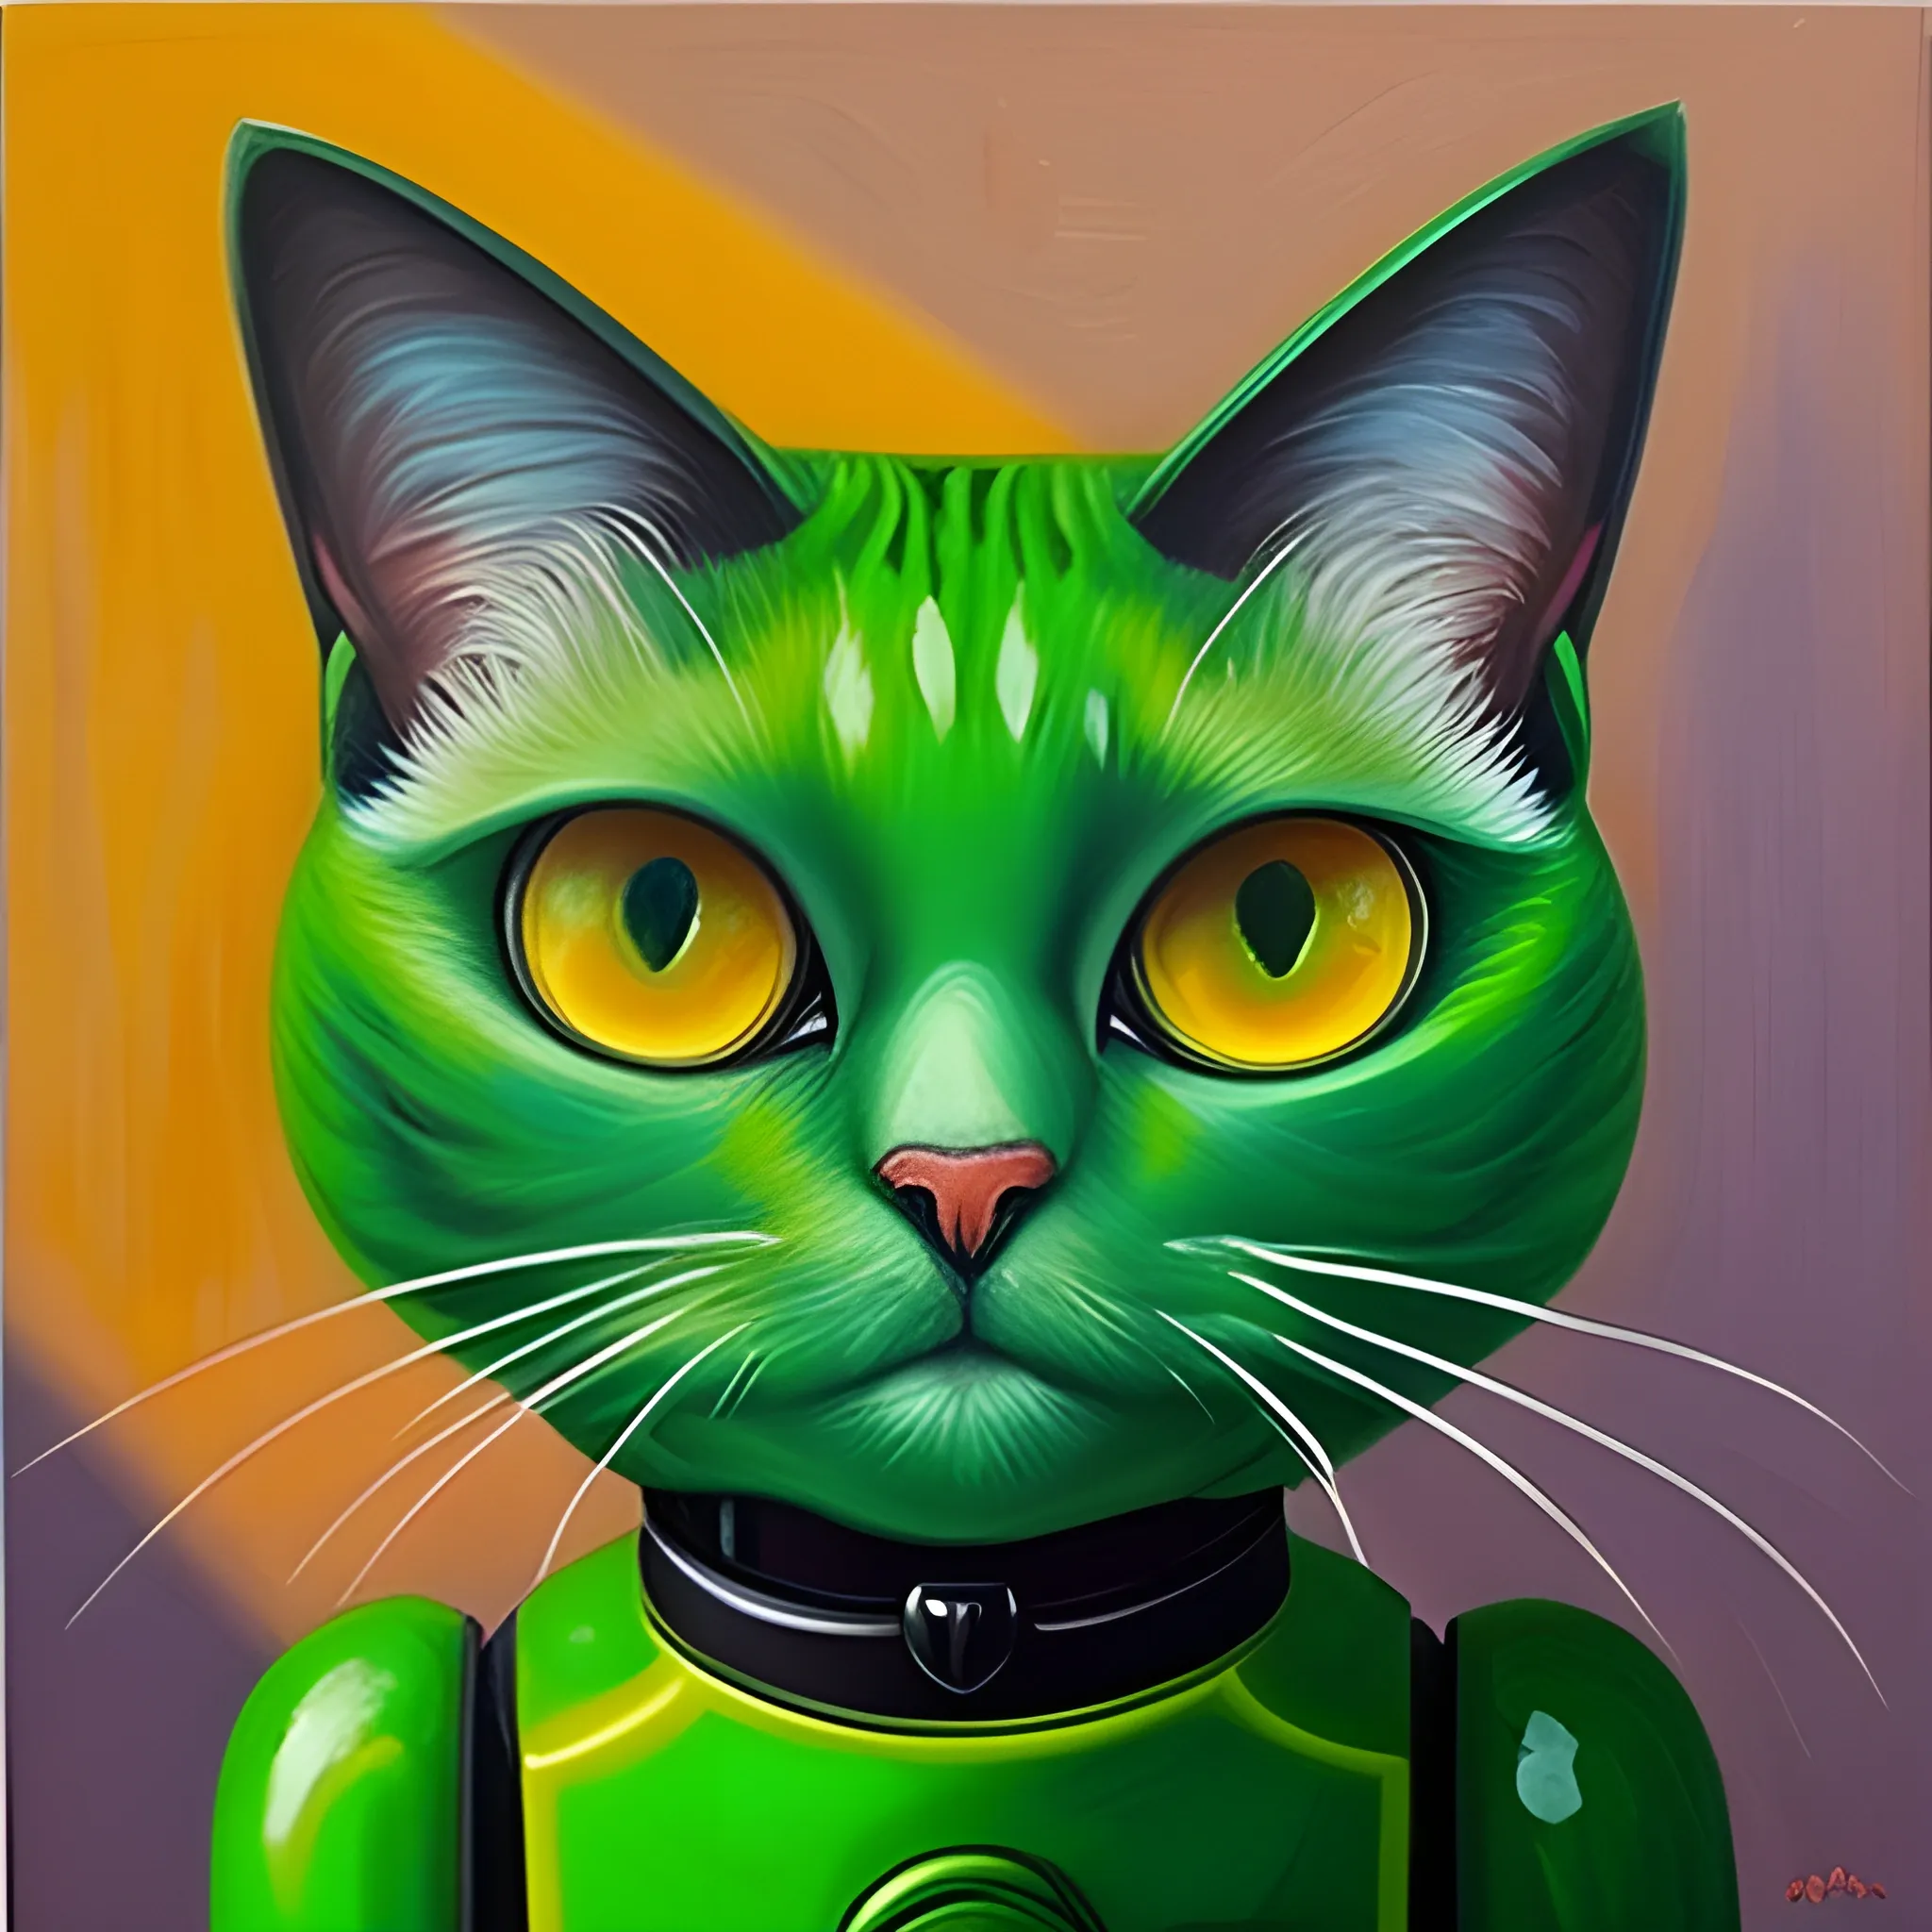 Adorable Green Cat robot with little eyes smile 
, Oil Painting